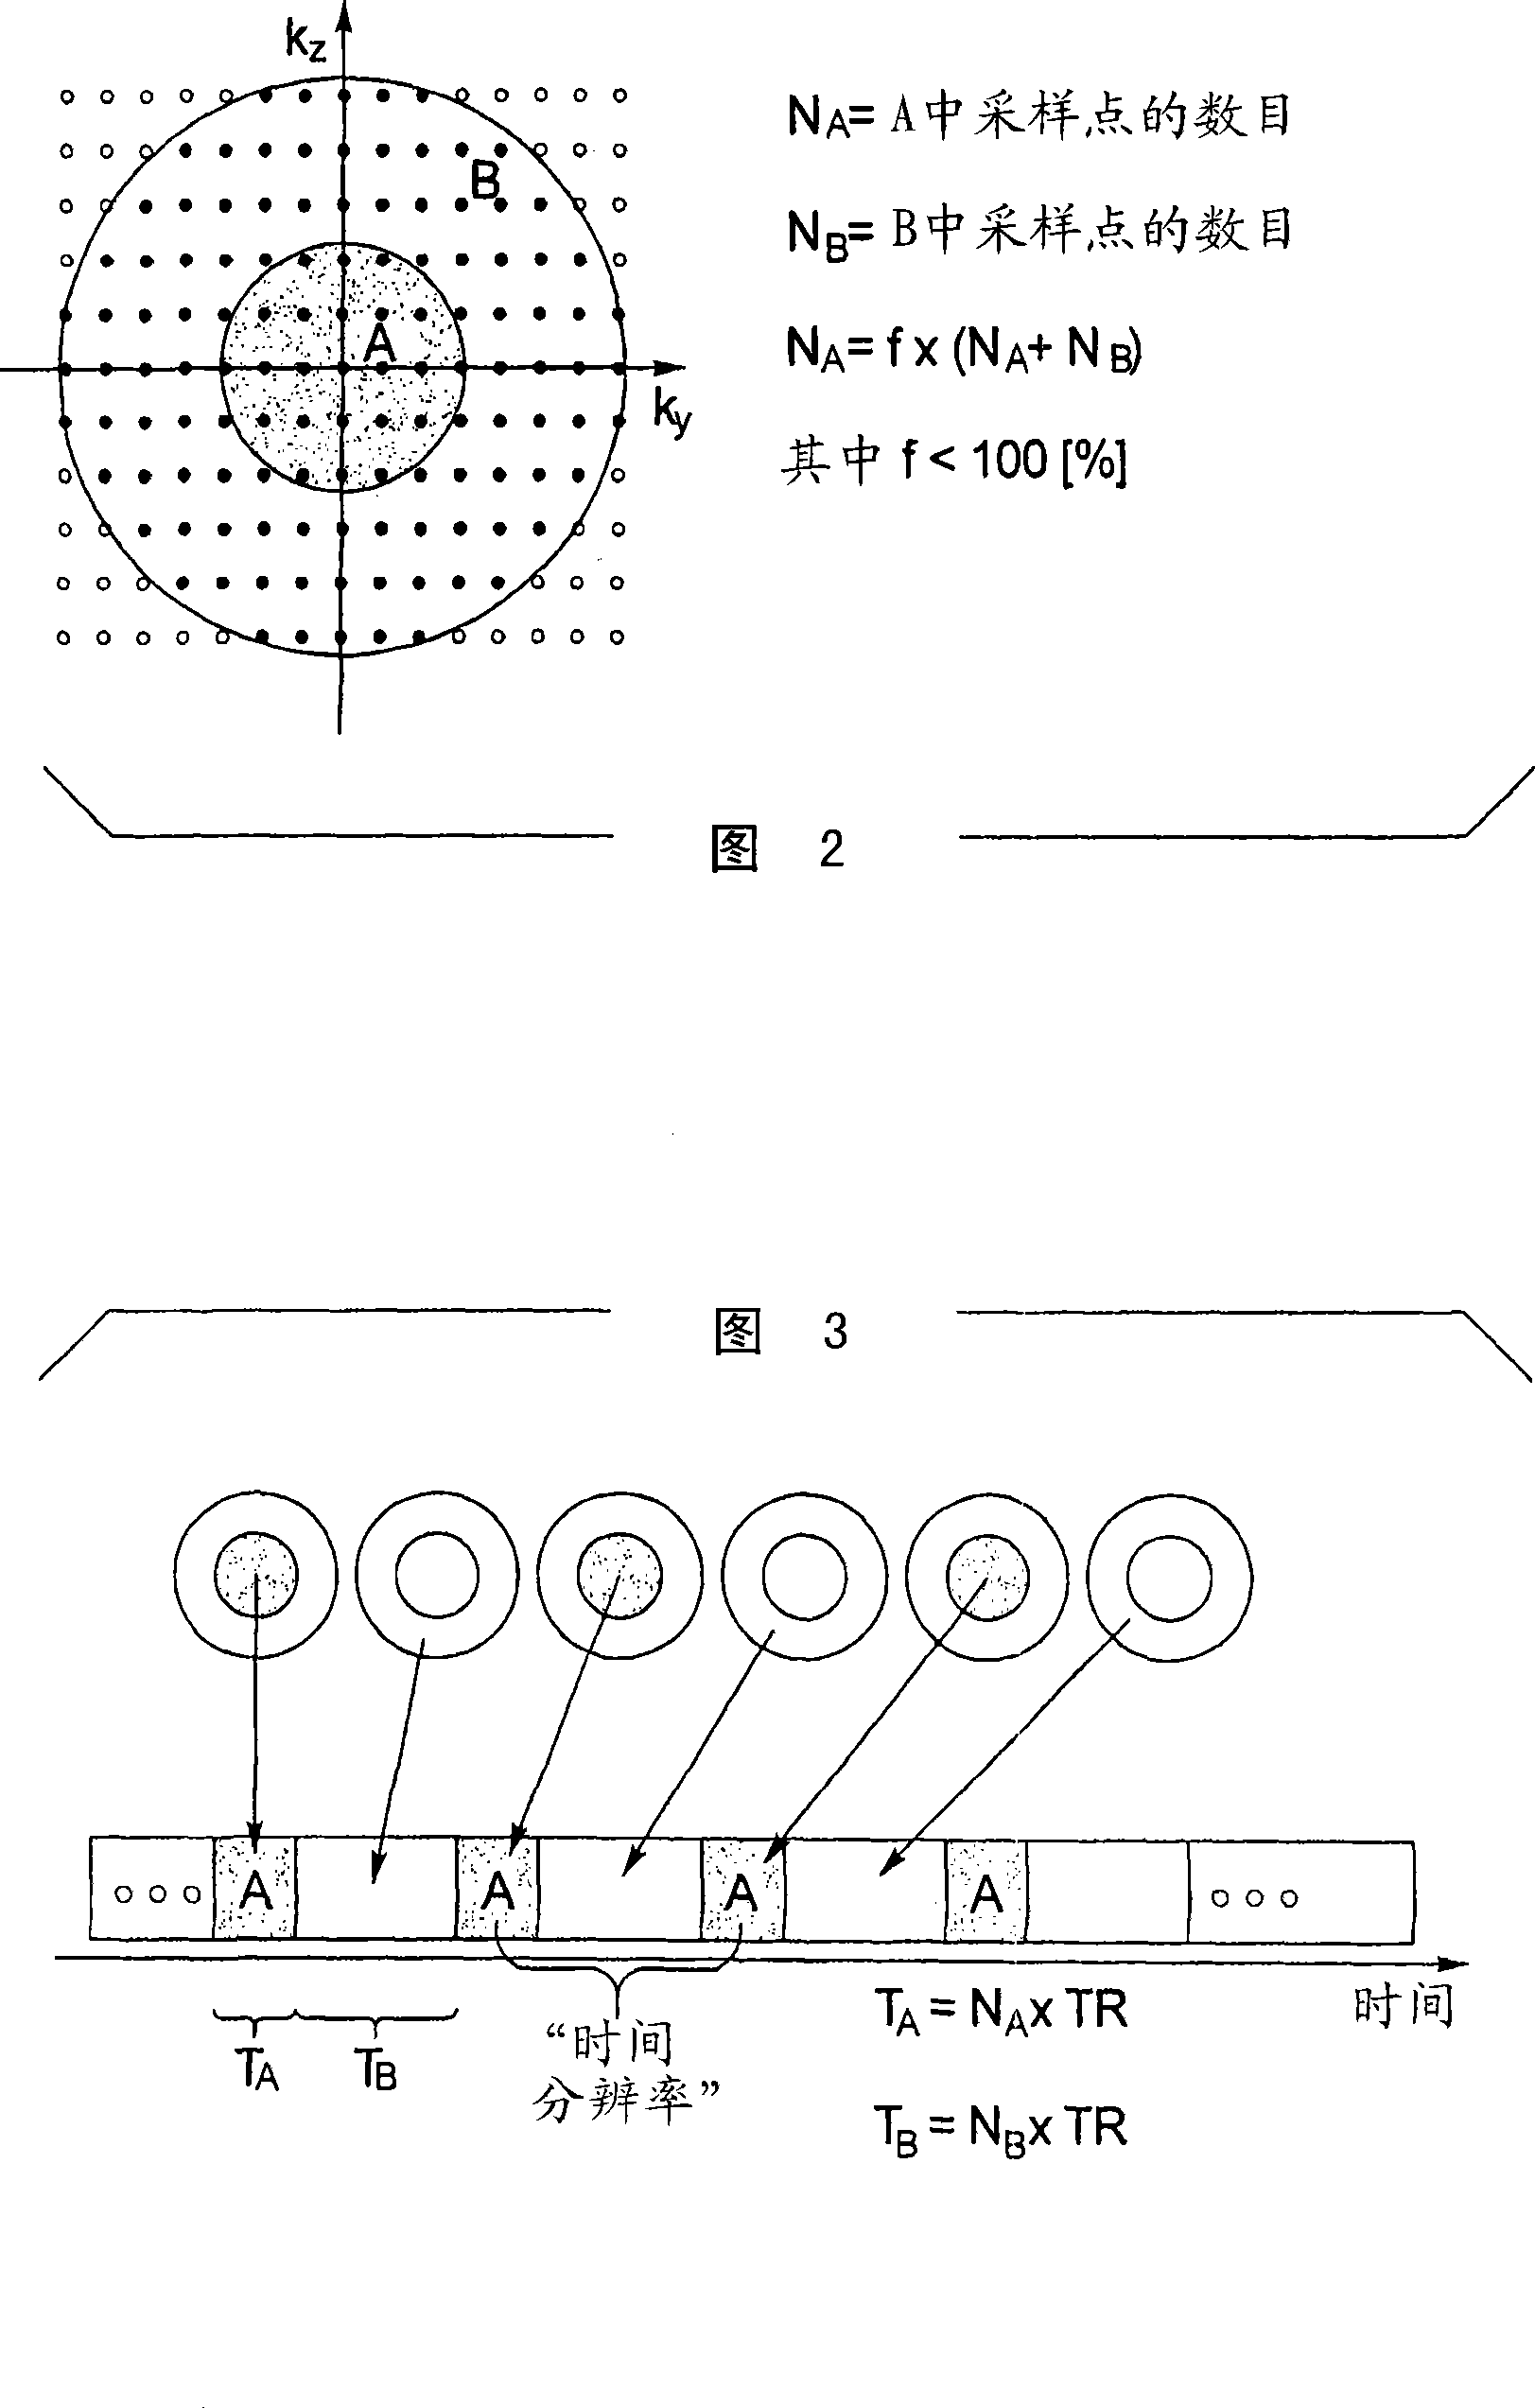 Method and apparatus for generating a magnetic resonance data file